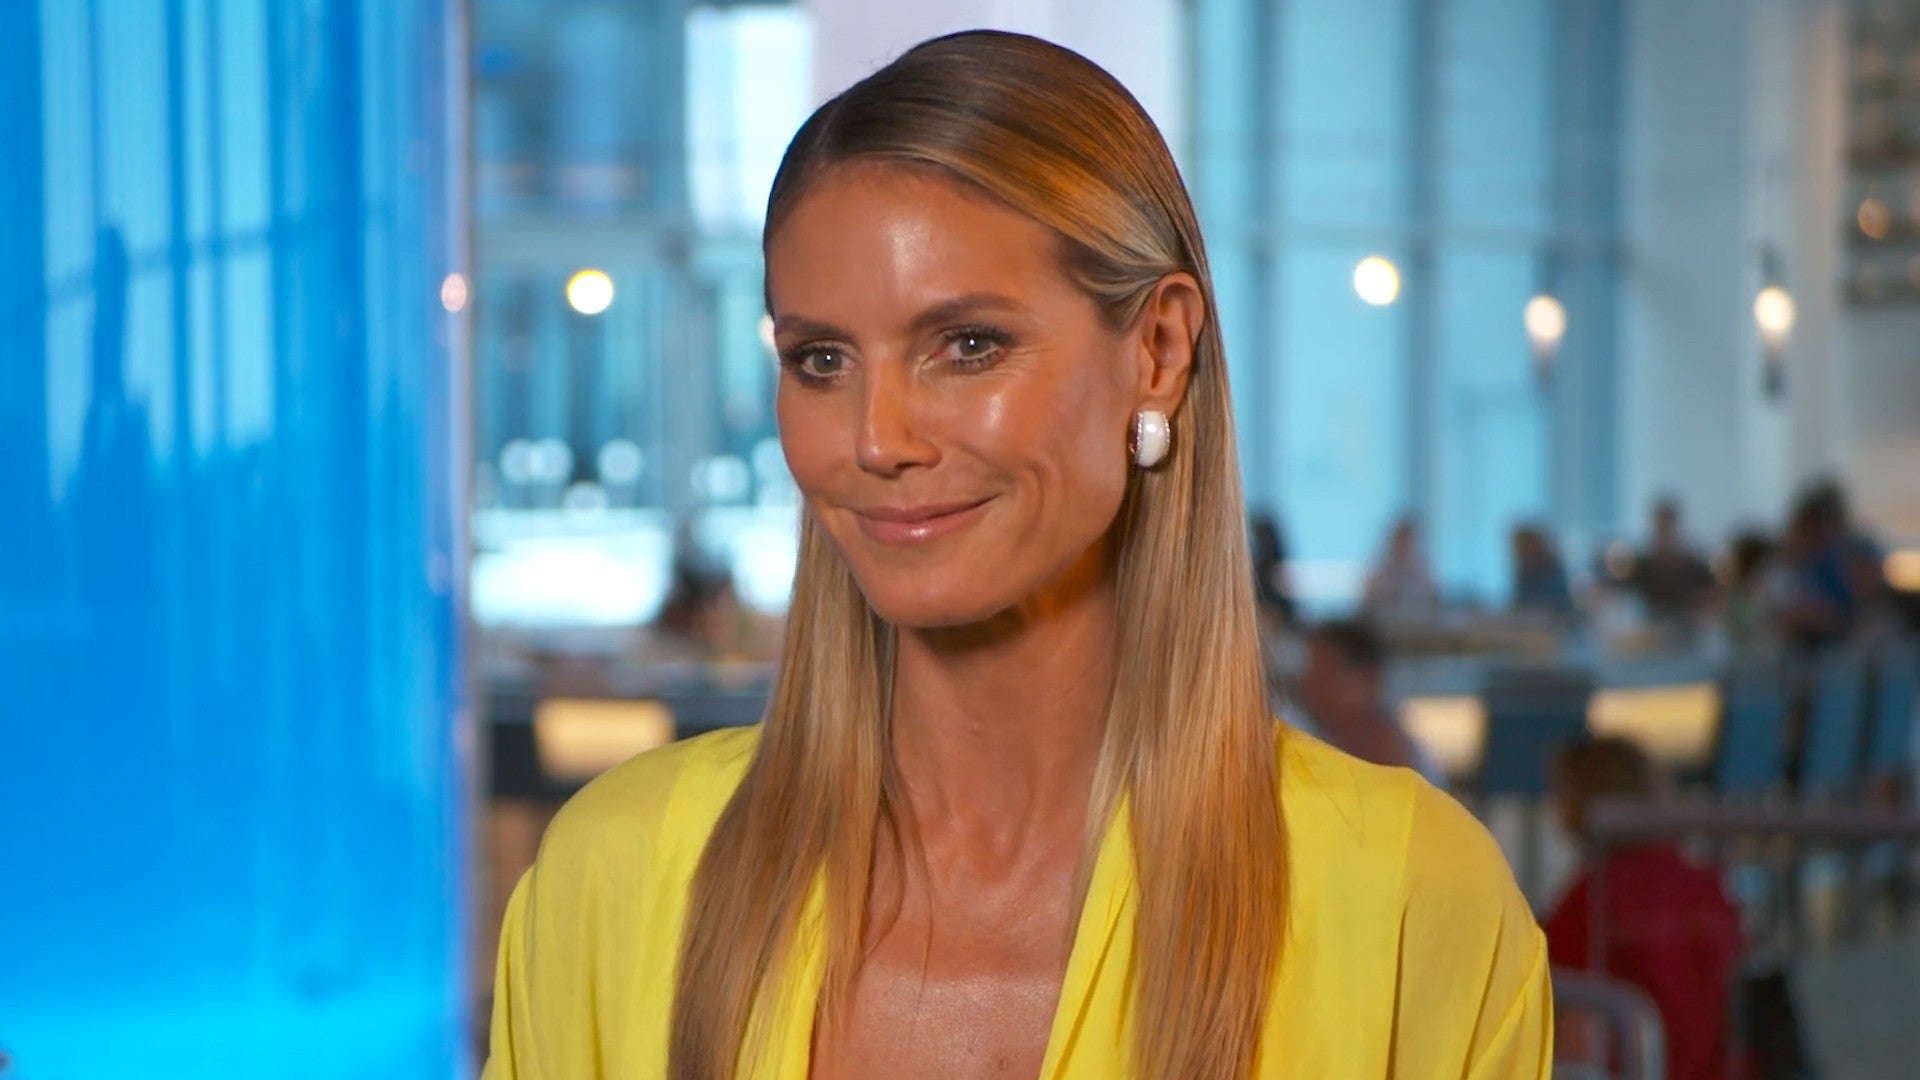 Heidi Klum Offers Up One Big Tip That Will Change Your Eating